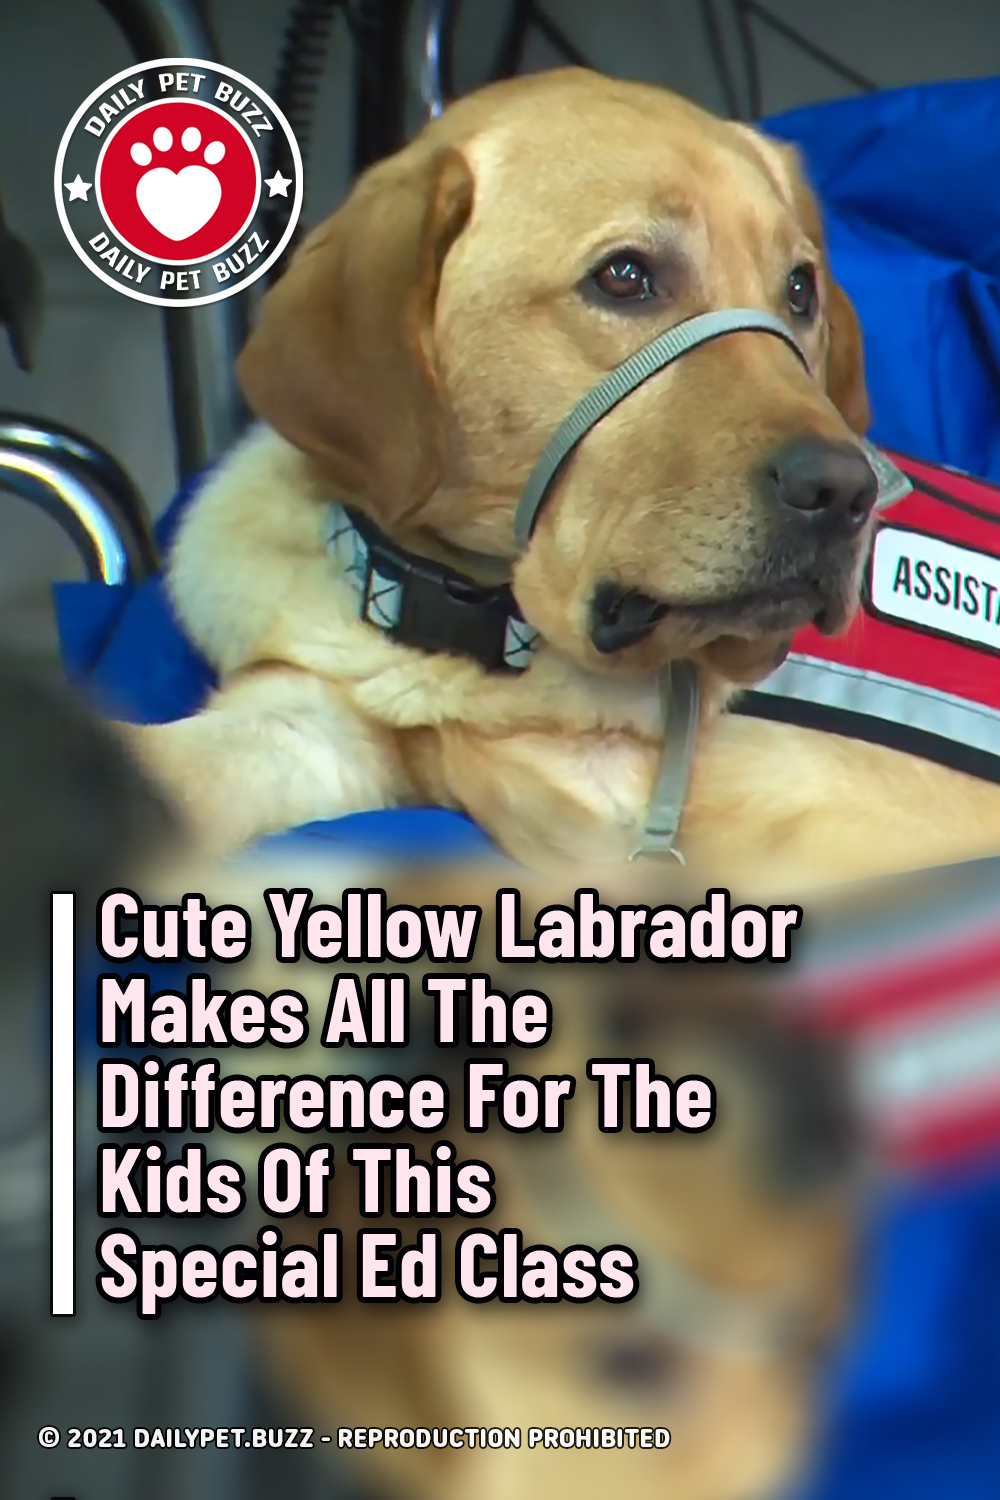 Cute Yellow Labrador Makes All The Difference For The Kids Of This Special Ed Class